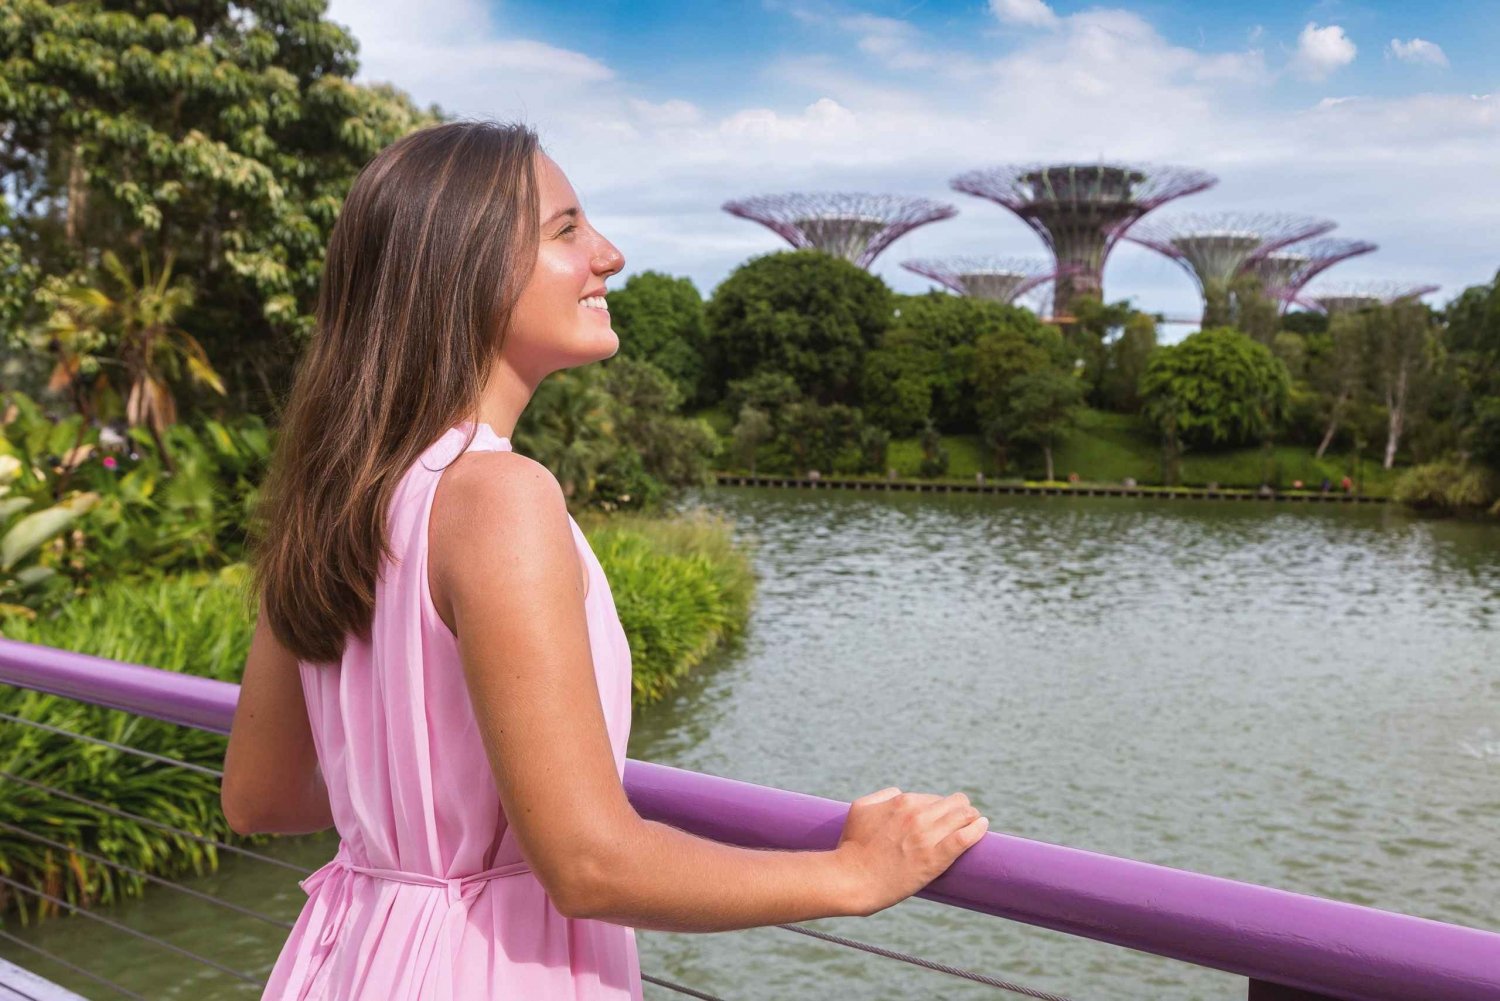 Singapore: Professional photoshoot at Gardens by the Bay